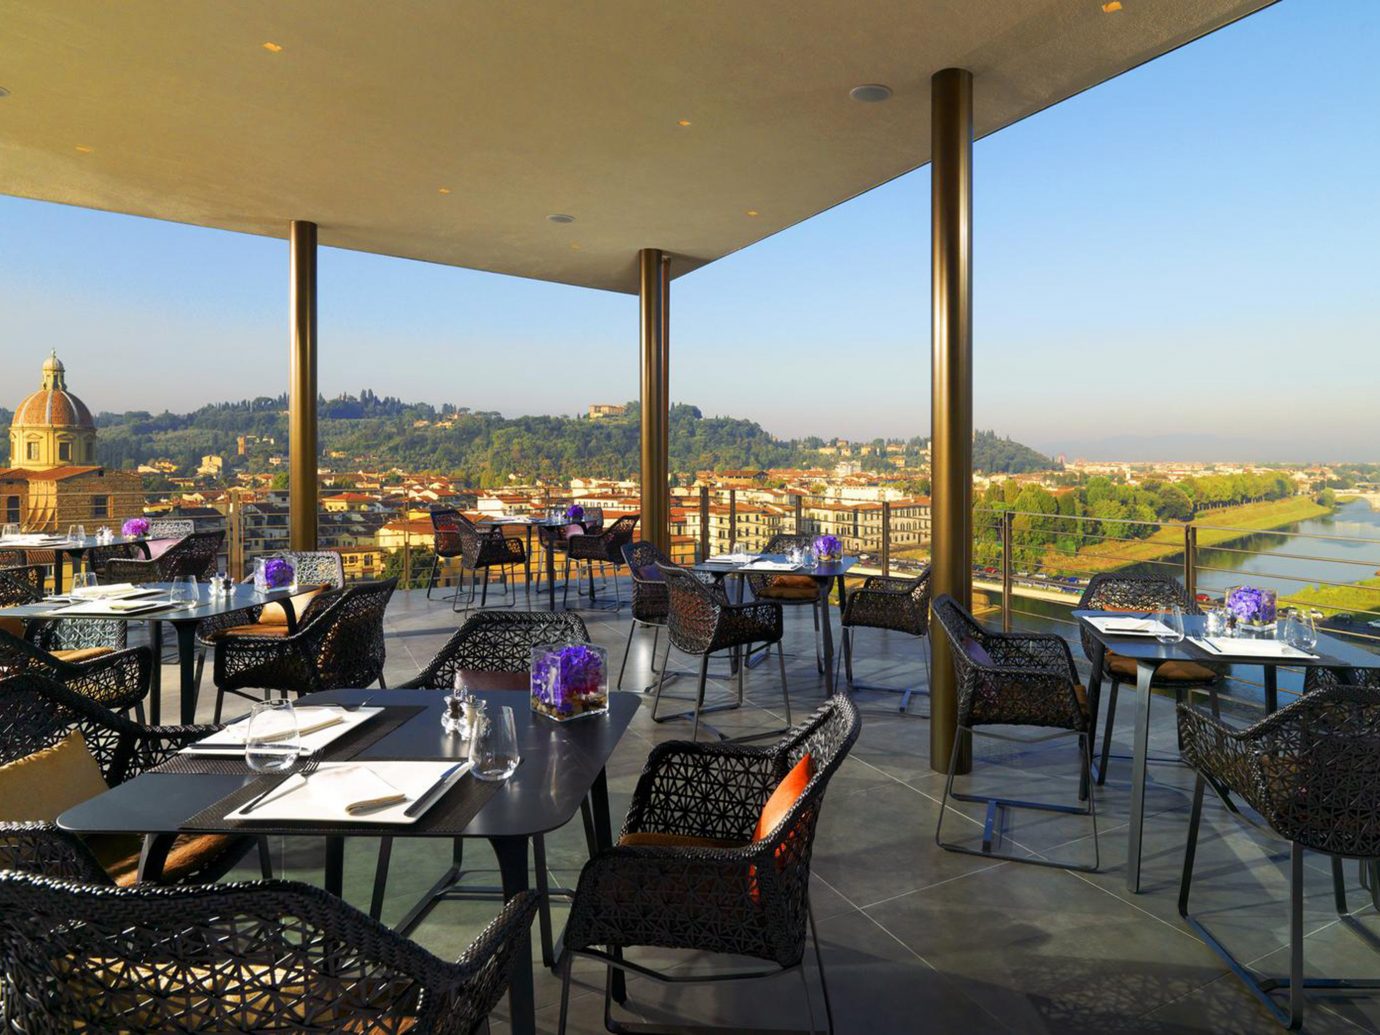 Deck Dining Florence Hotels Italy sky chair outdoor restaurant vacation estate Resort overlooking set several day